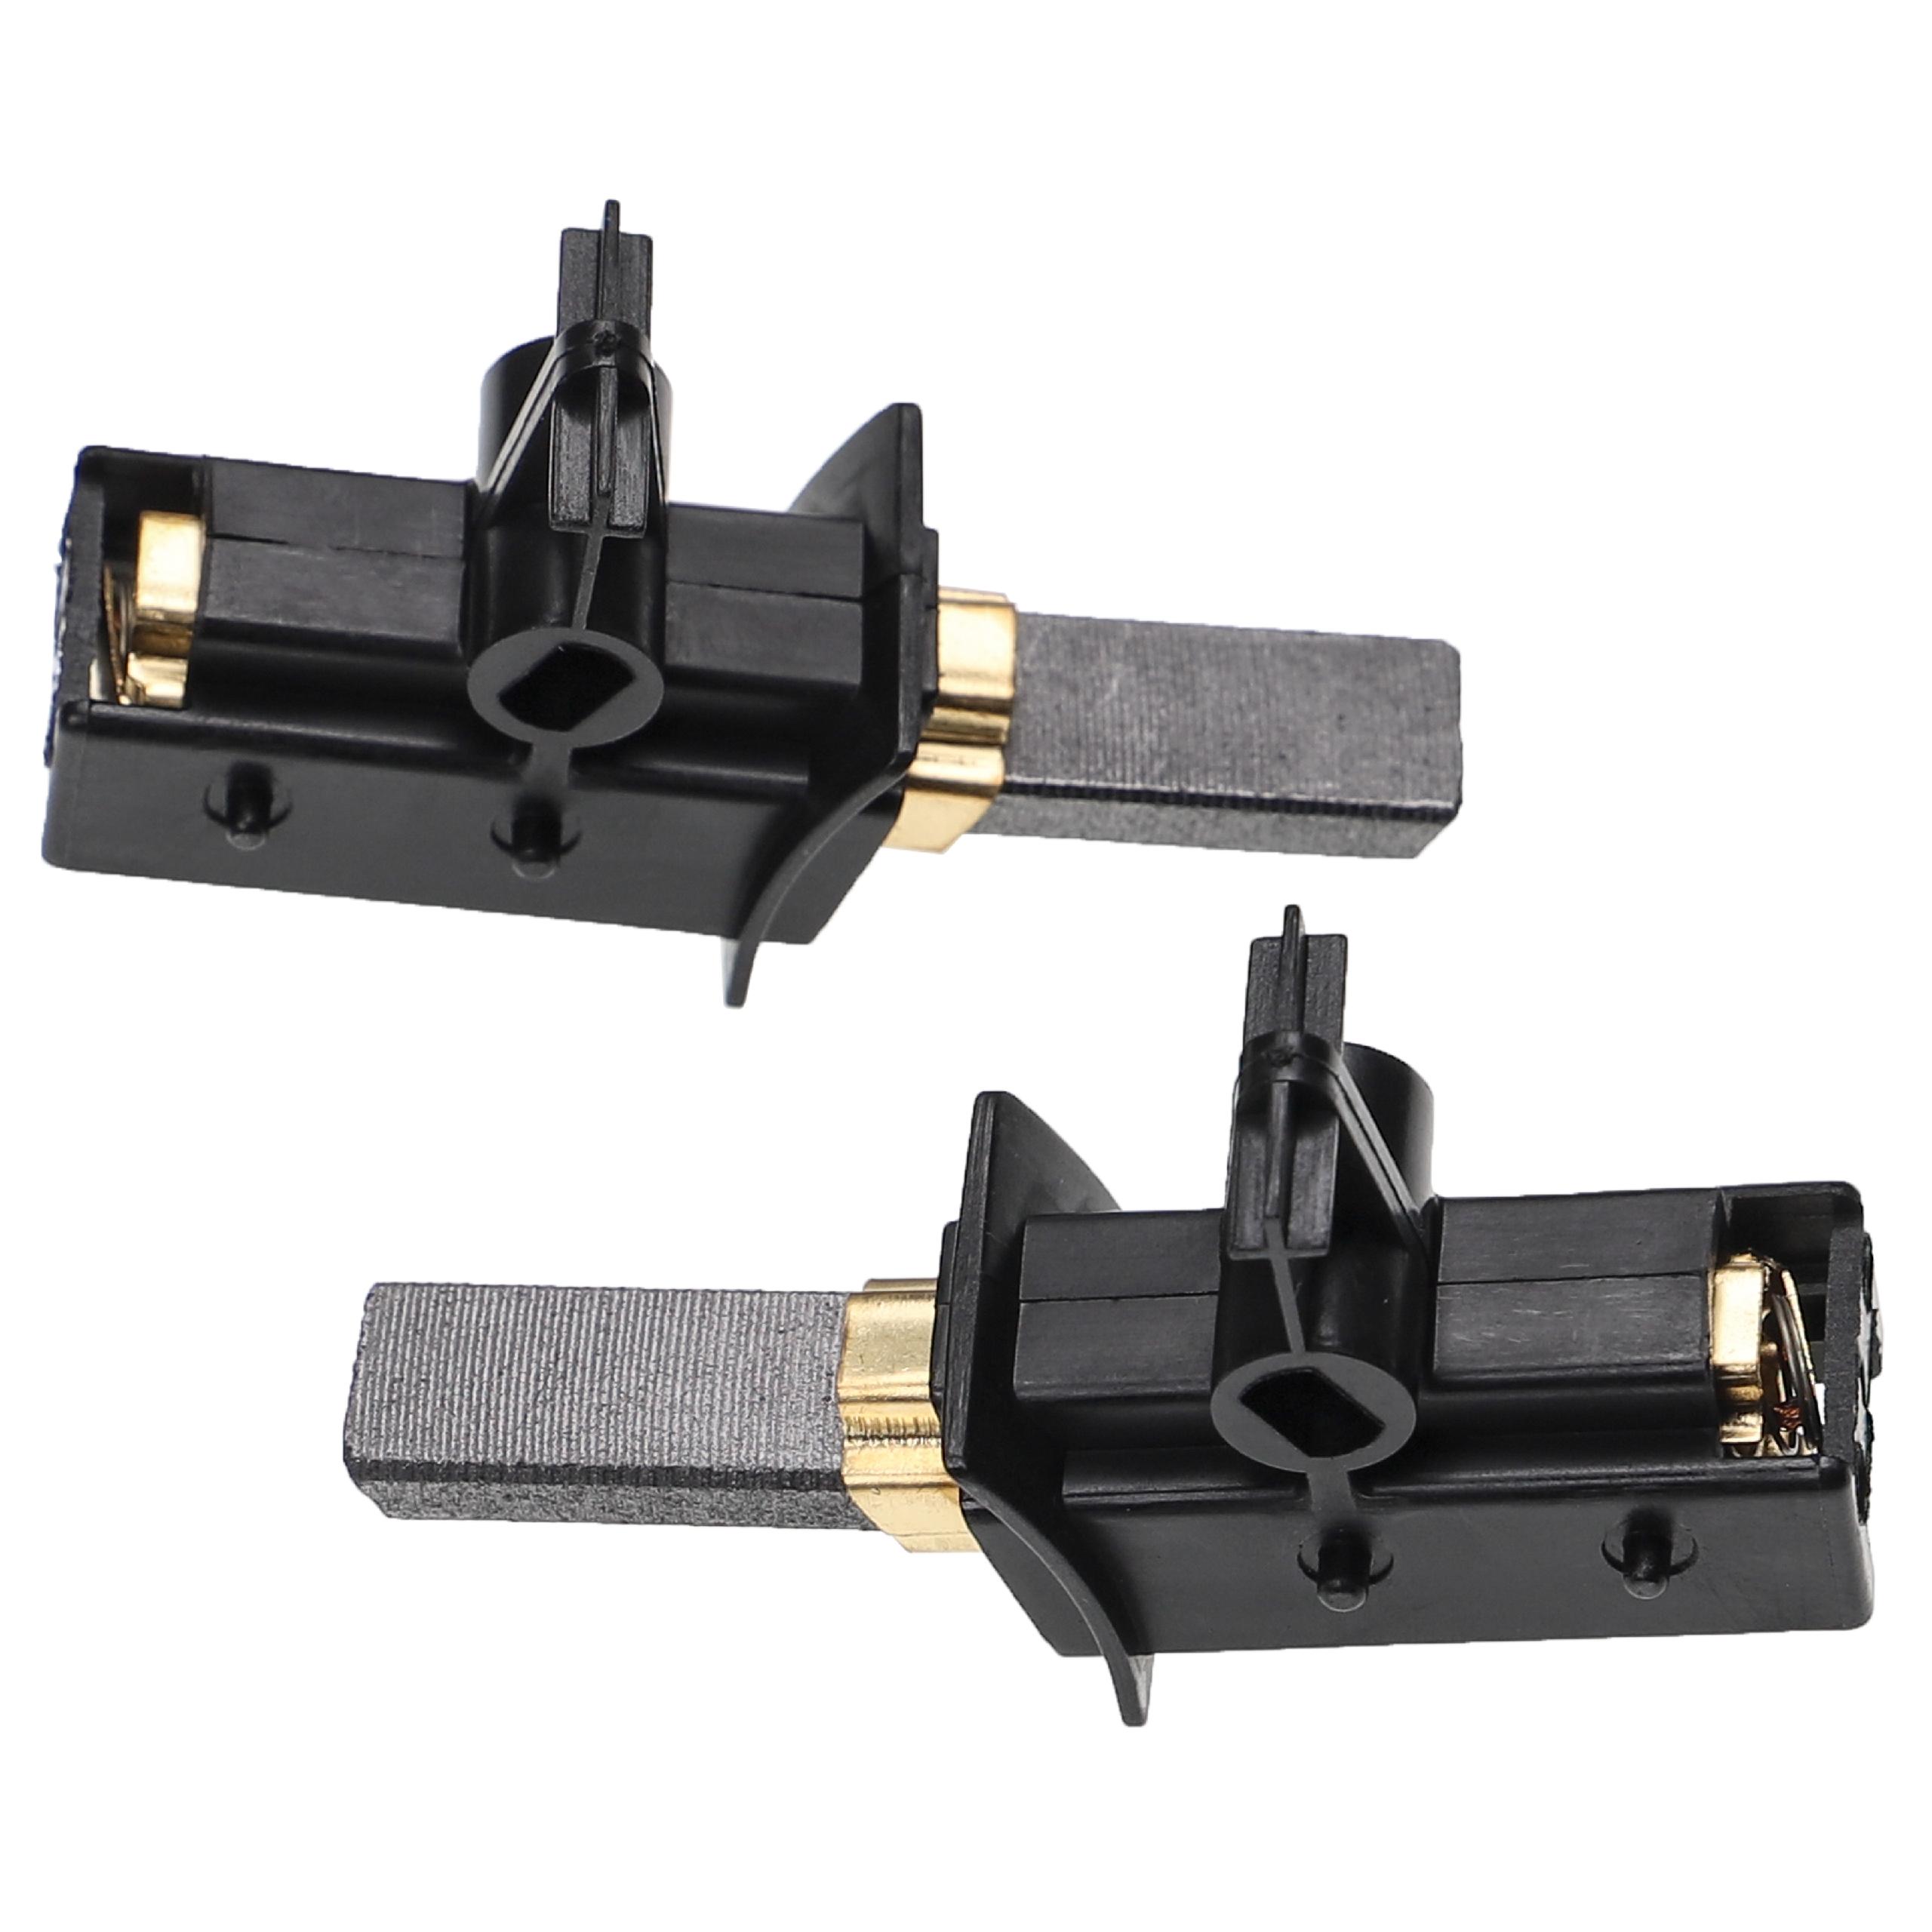 2x Carbon Brush as Replacement for 182364, 00600883, 00600889 Electric Power Tools + Holder, 5 x 12.5 x 36mm